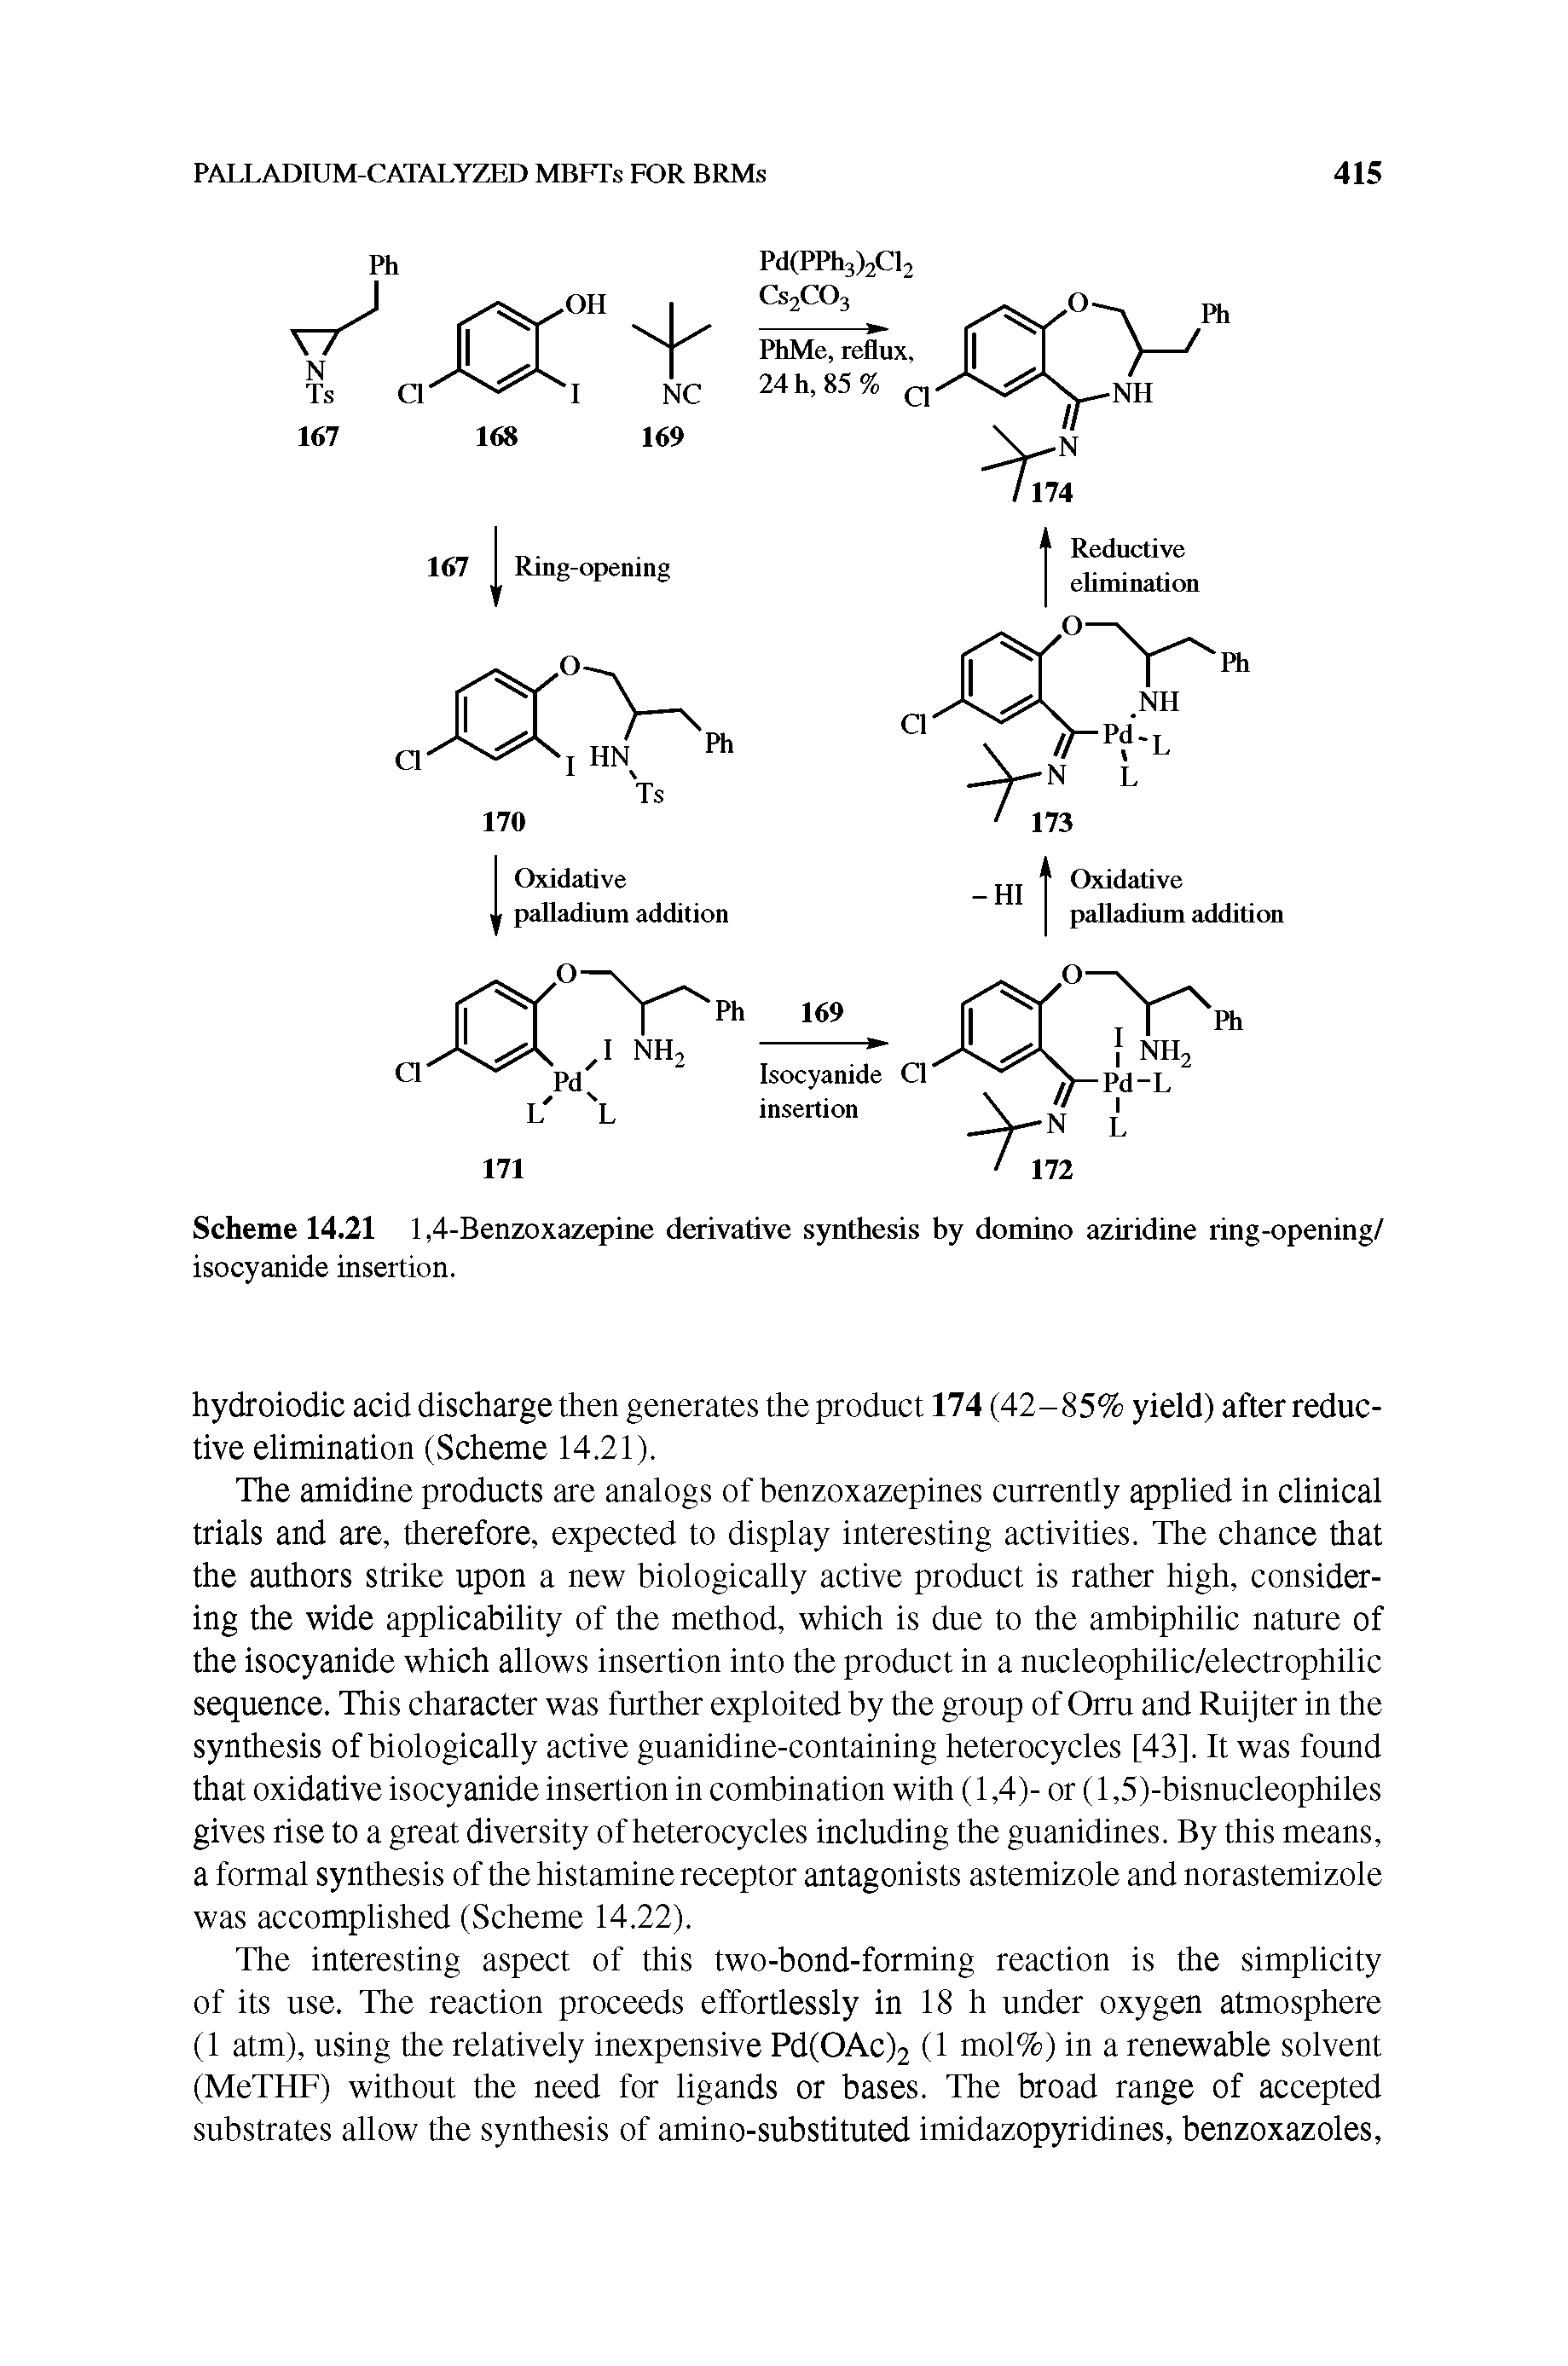 Scheme 14.21 1,4-Benzoxazepine derivative synthesis by domino aziridine ring-opening/...